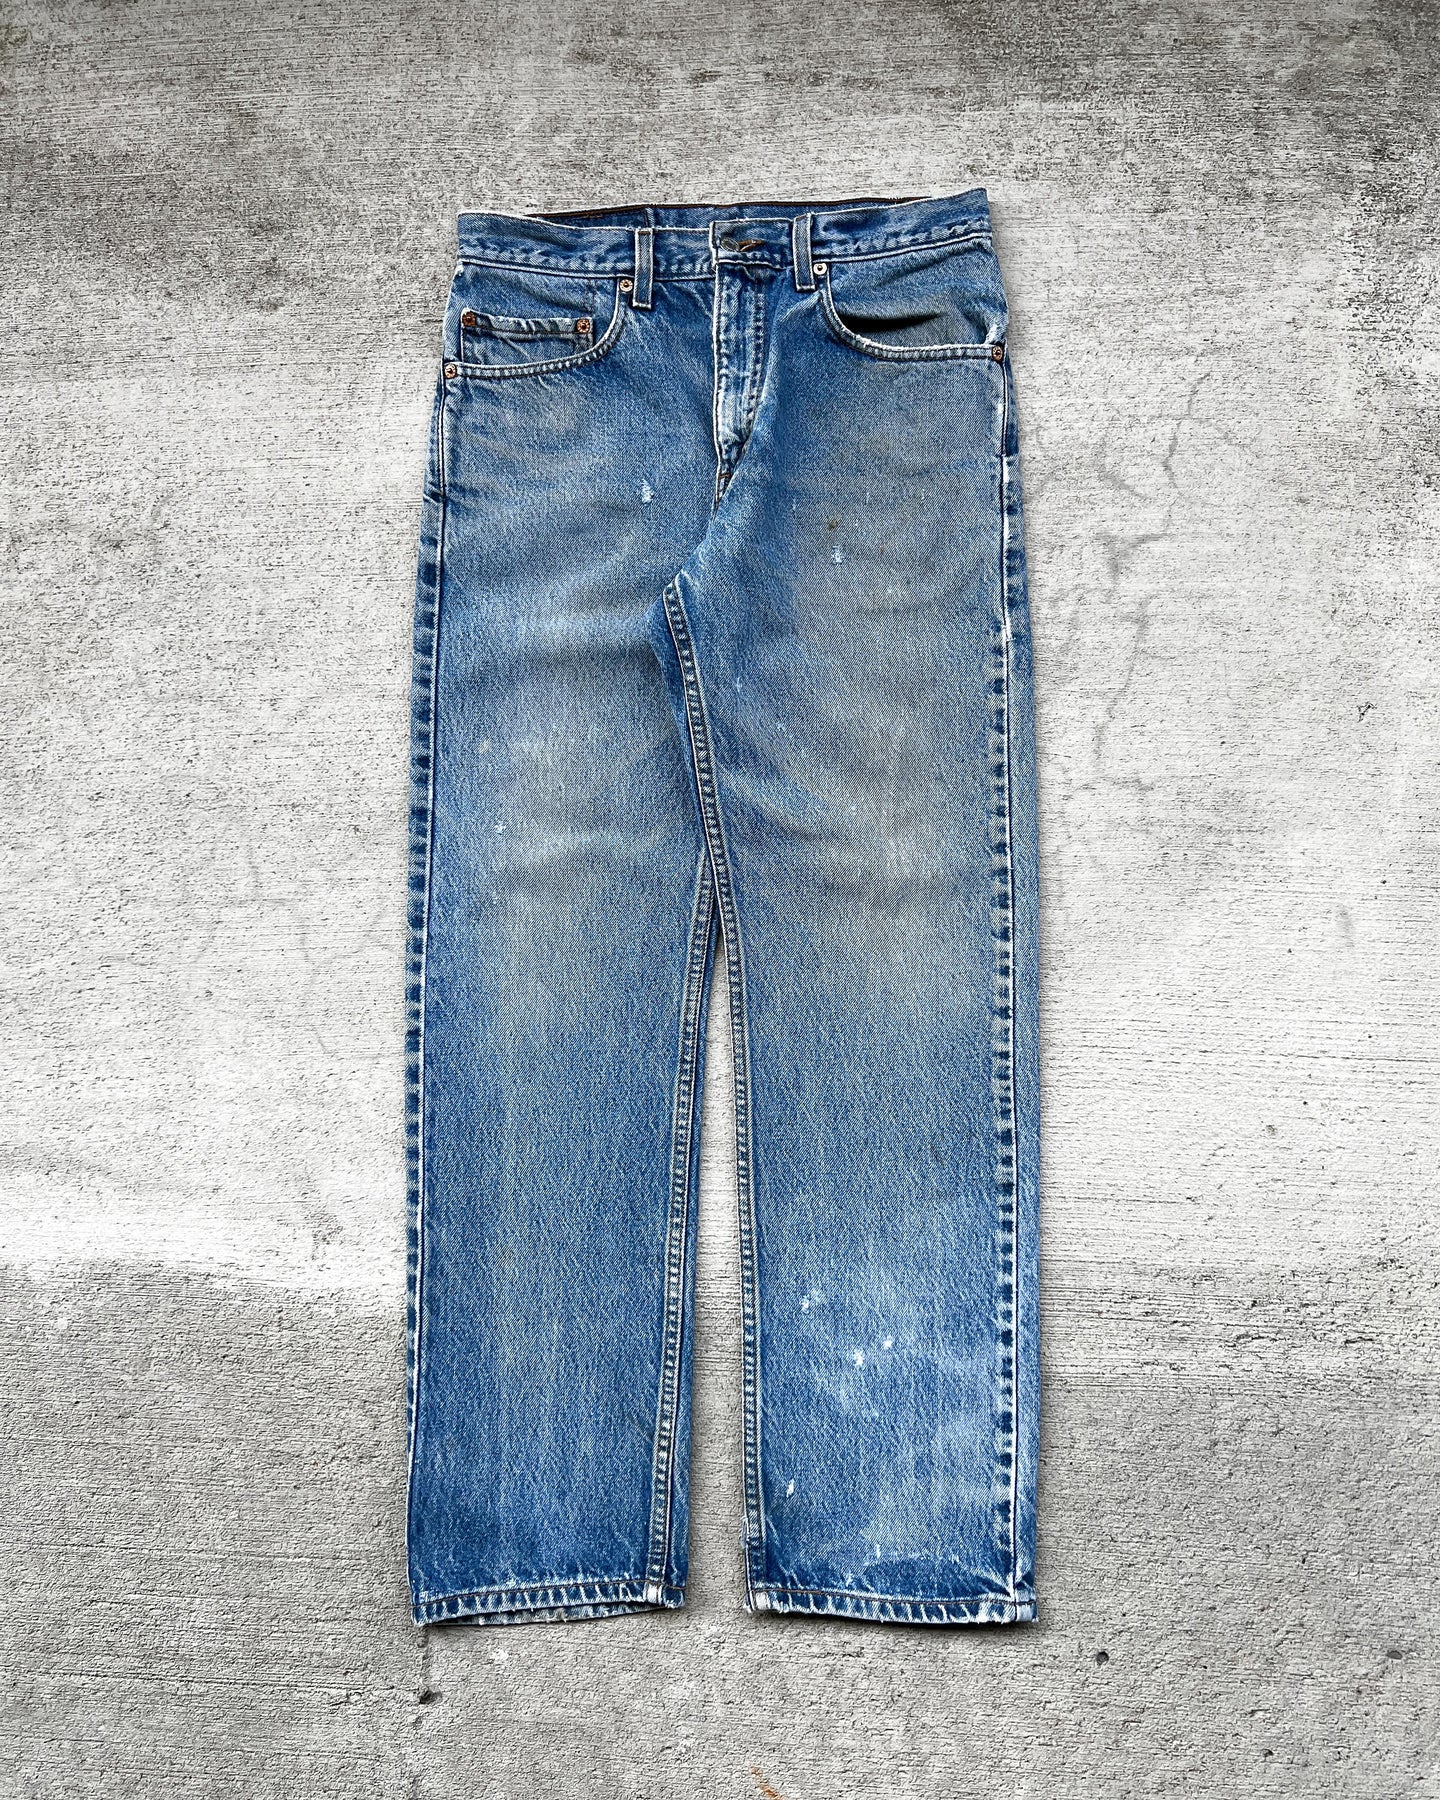 1990s Levi's Well Worn Dirty 505 - Size 31 x 30